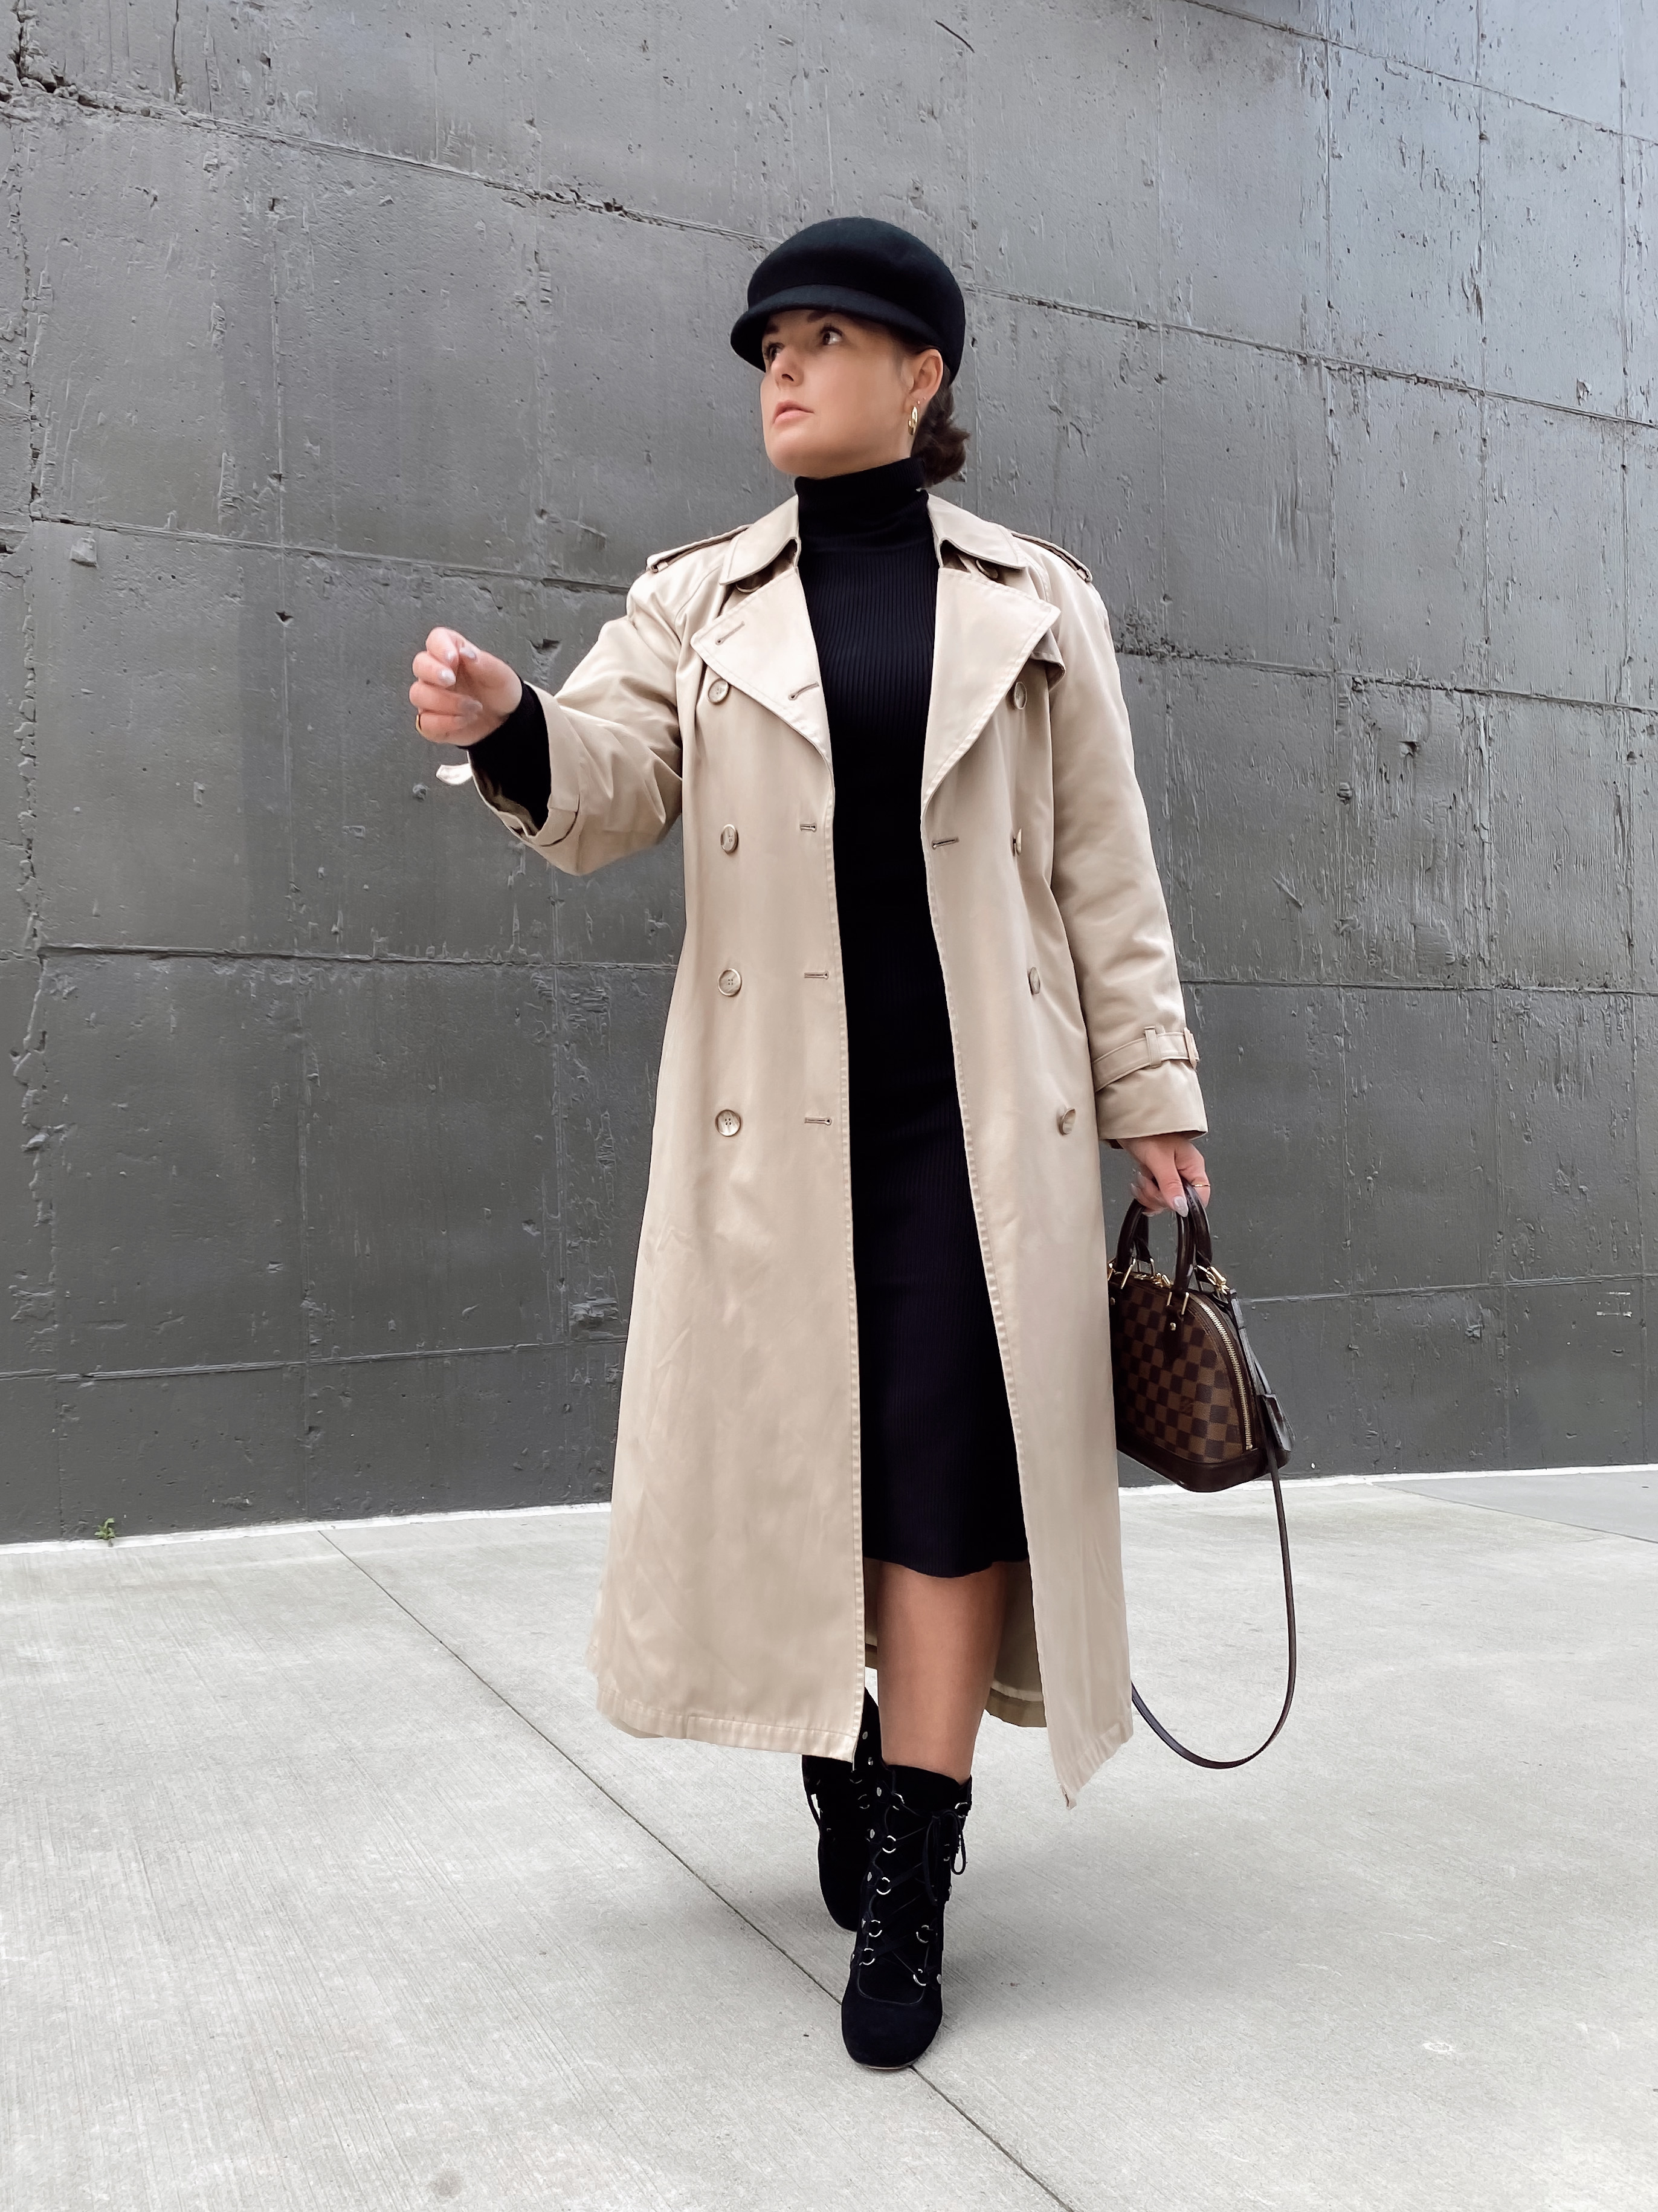 5 Different Ways to Style a Trench Coat